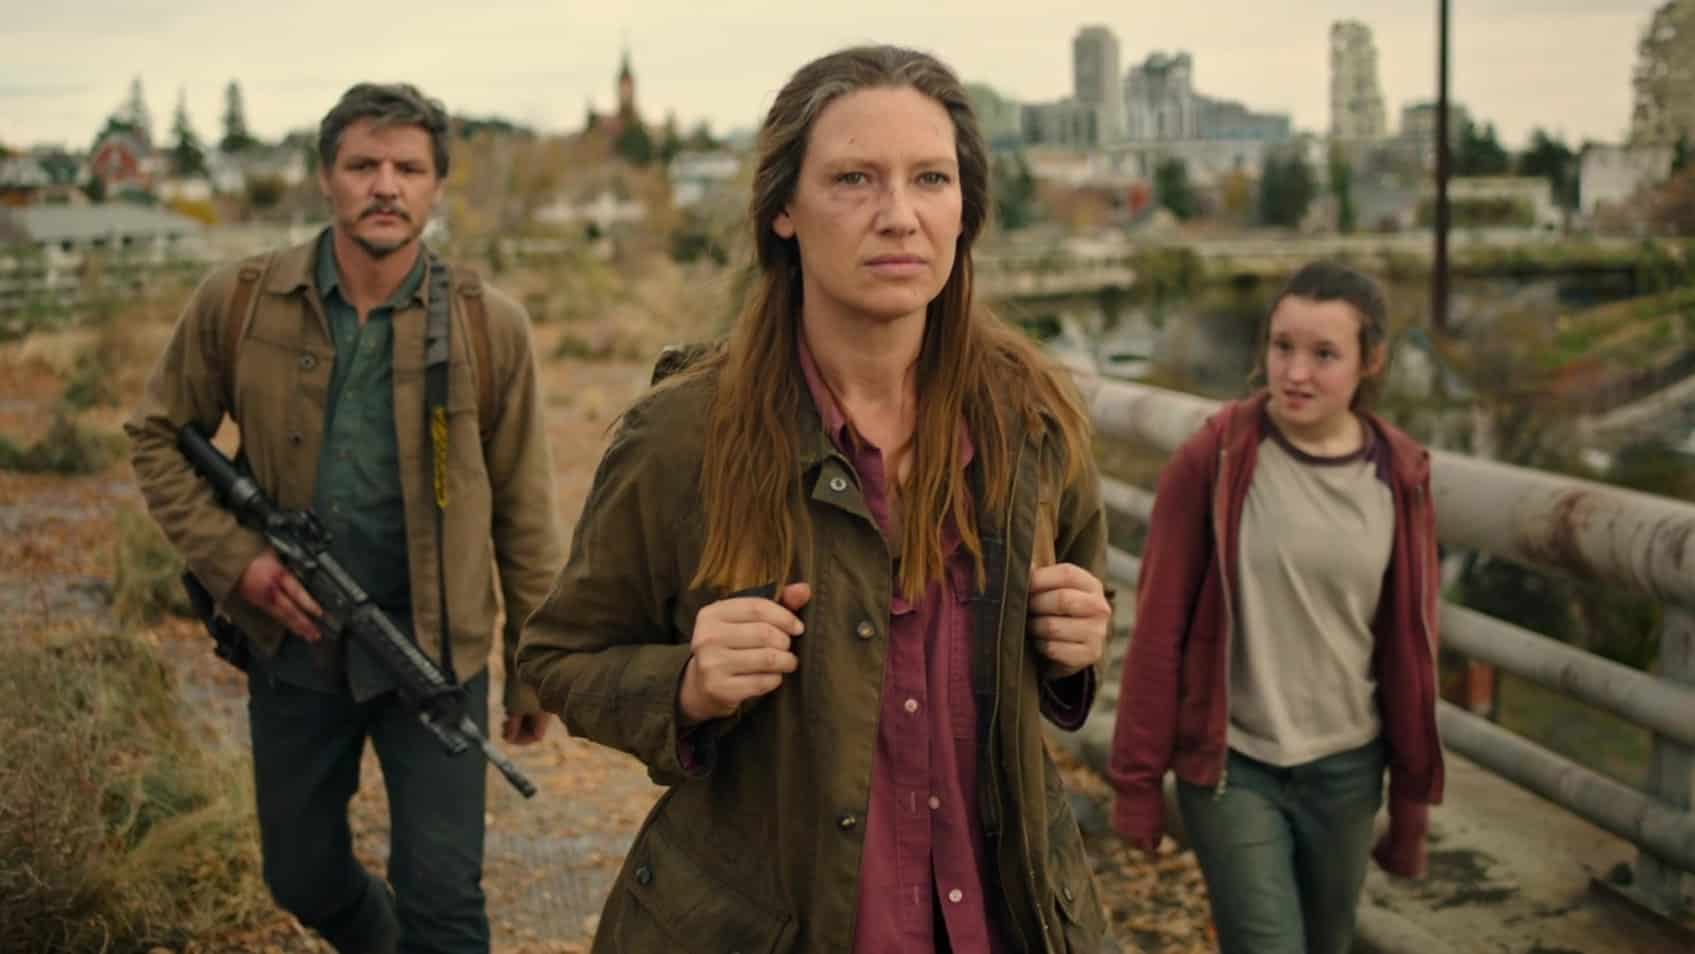 TV REVIEW – EPISODE 2 OF “THE LAST OF US”